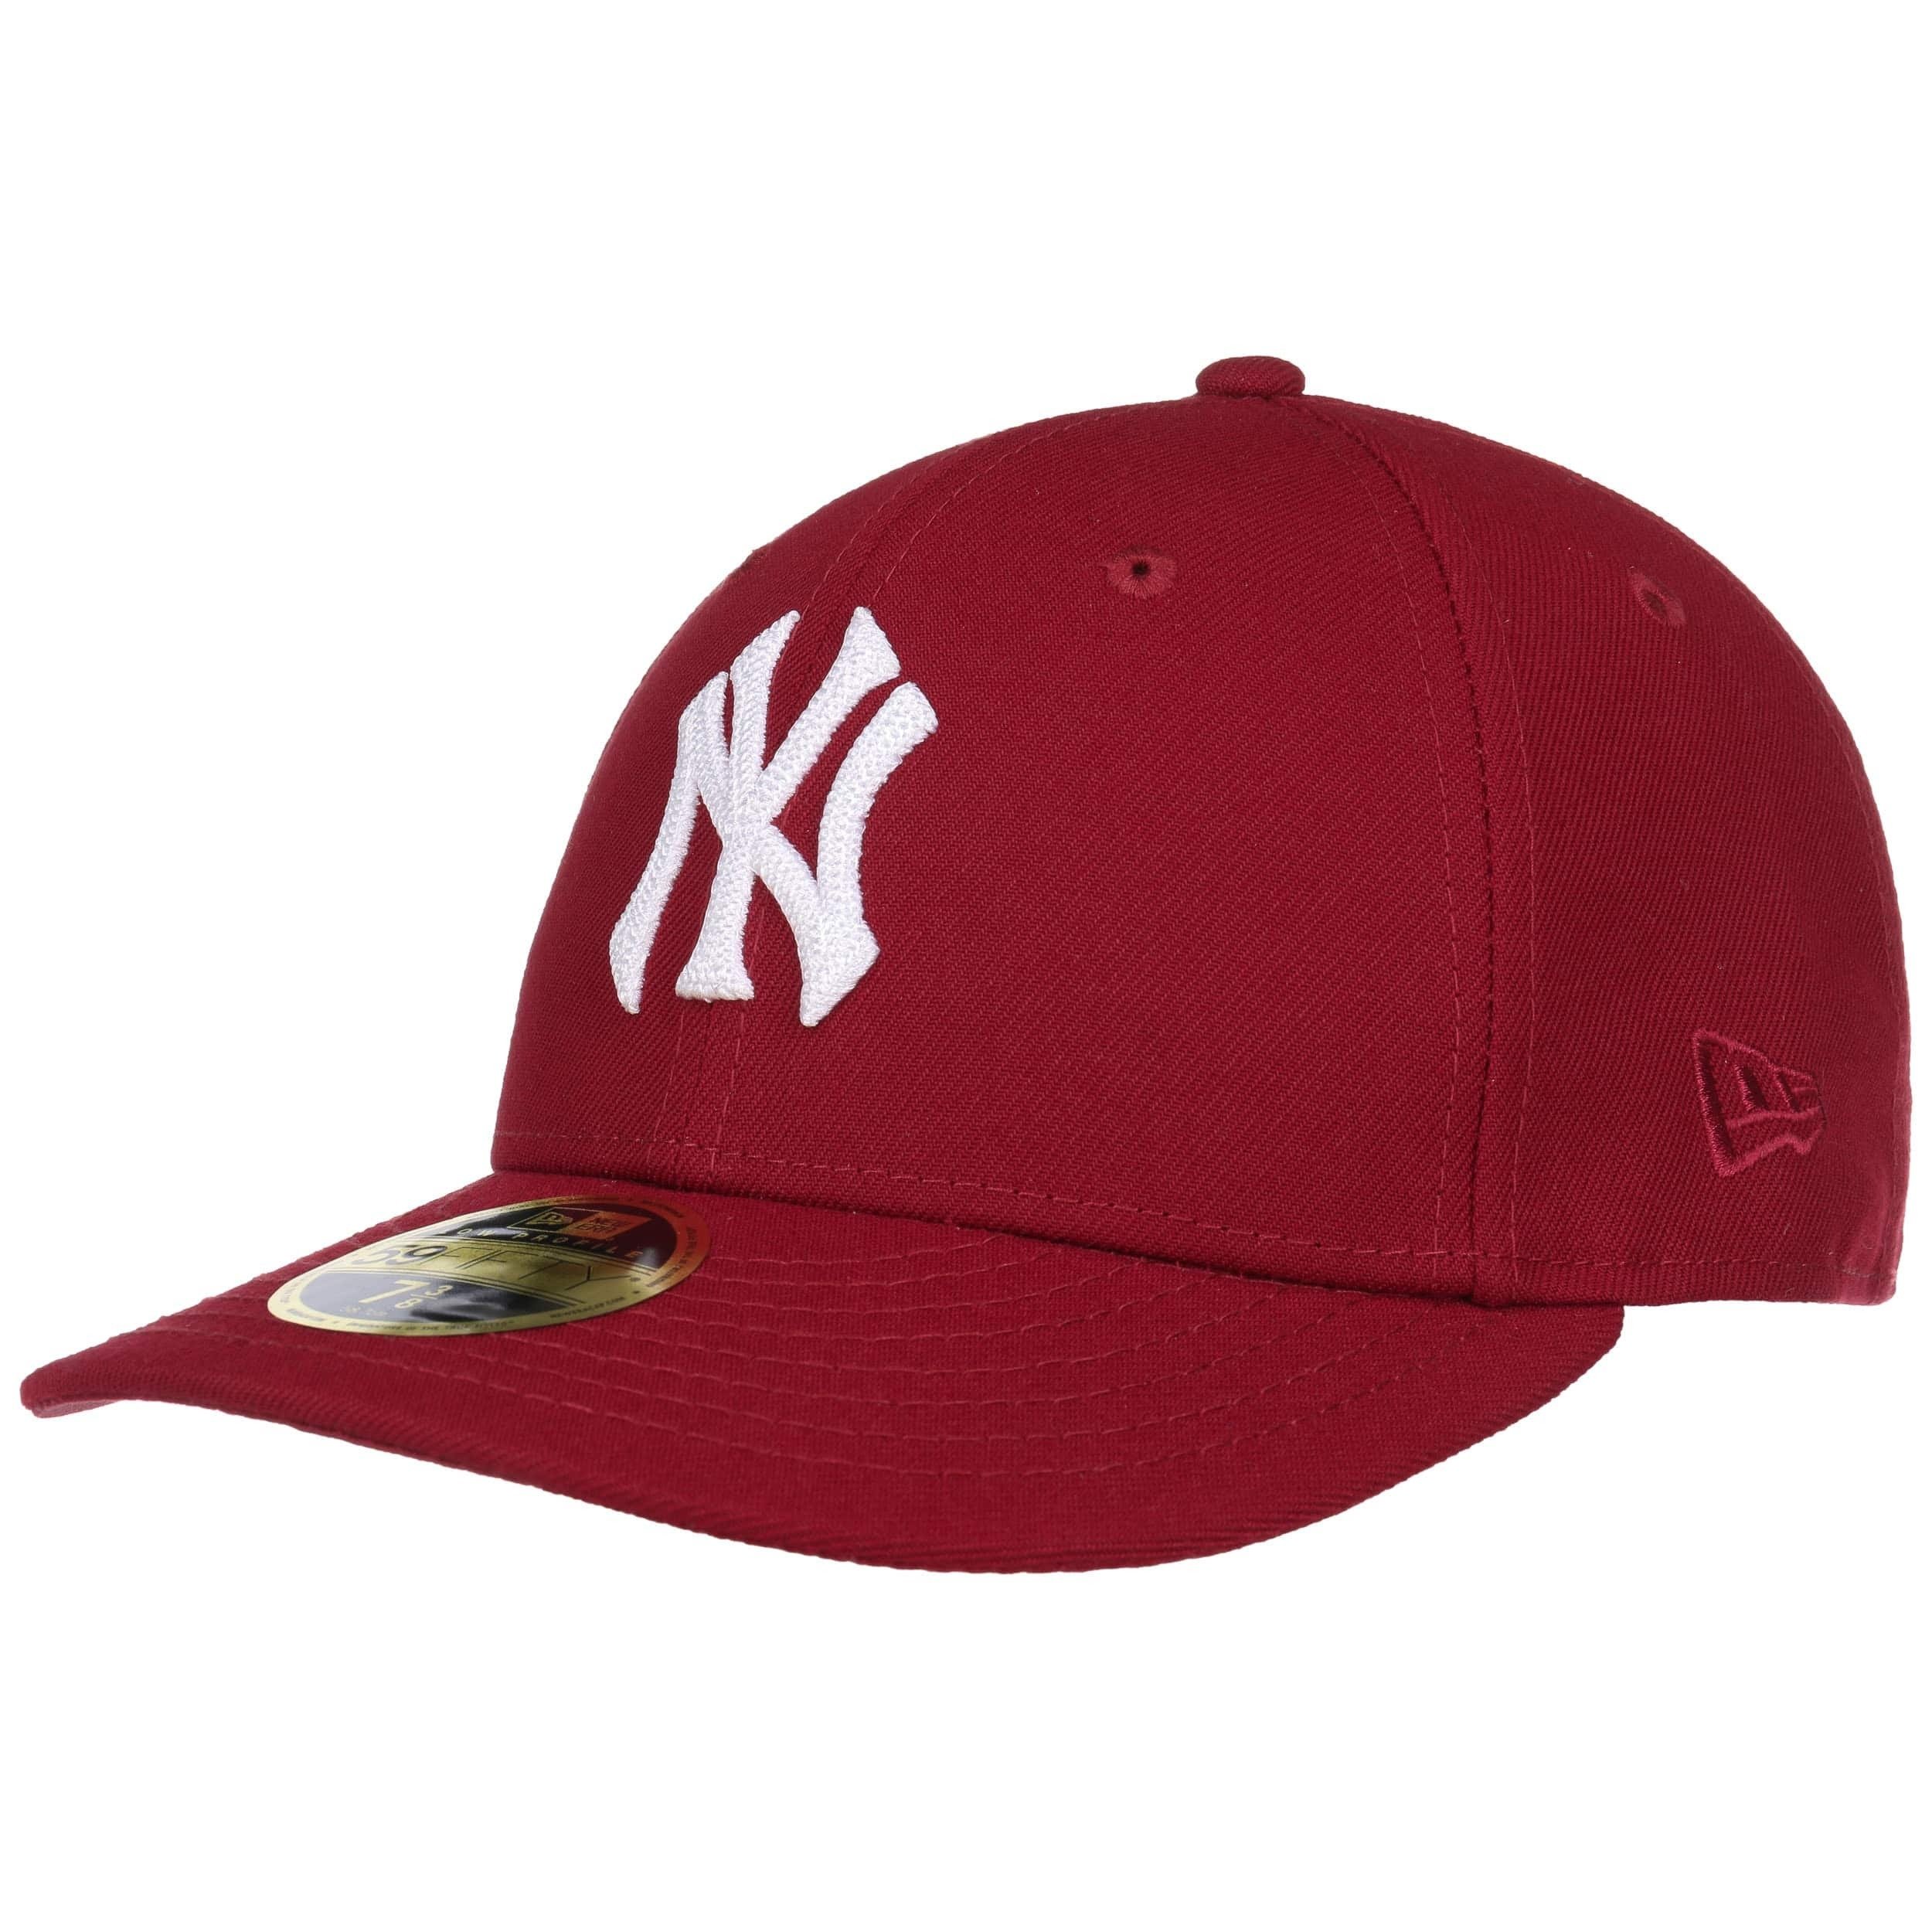 59Fifty Low Profile Yankees Cap by New Era - 39,95